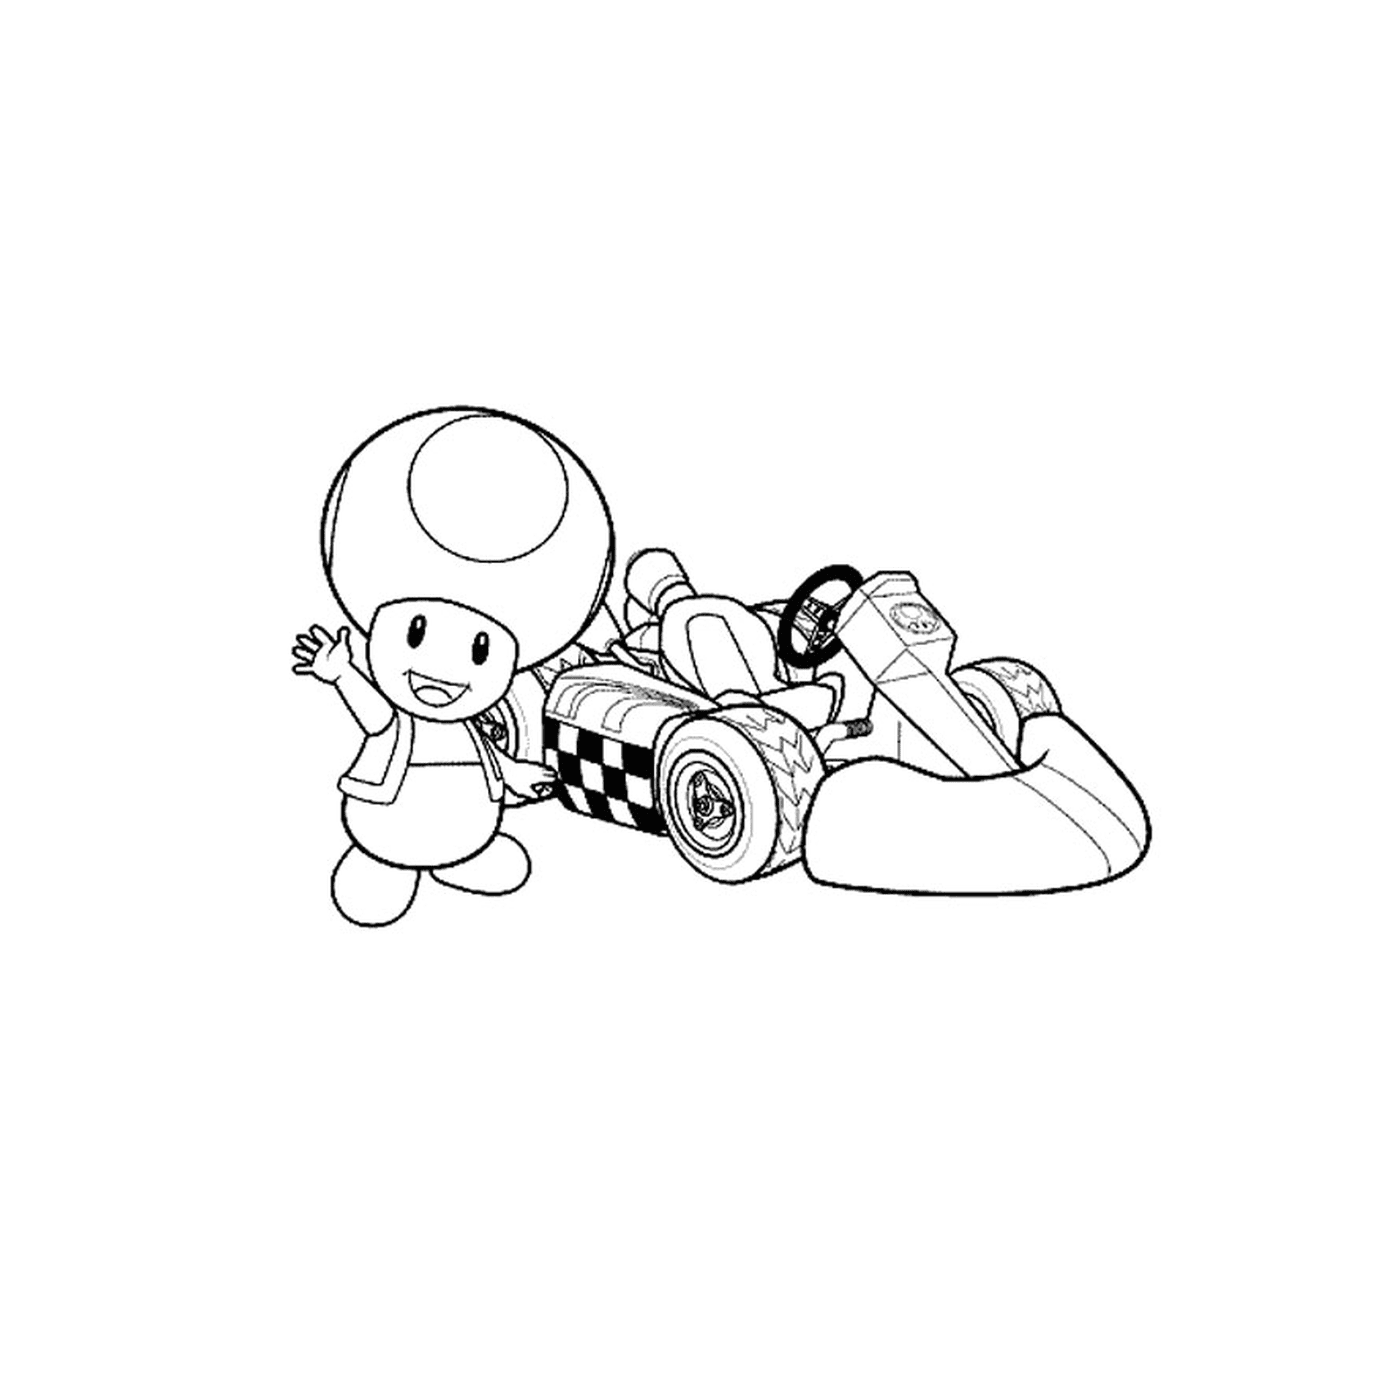  Toad and a kart 